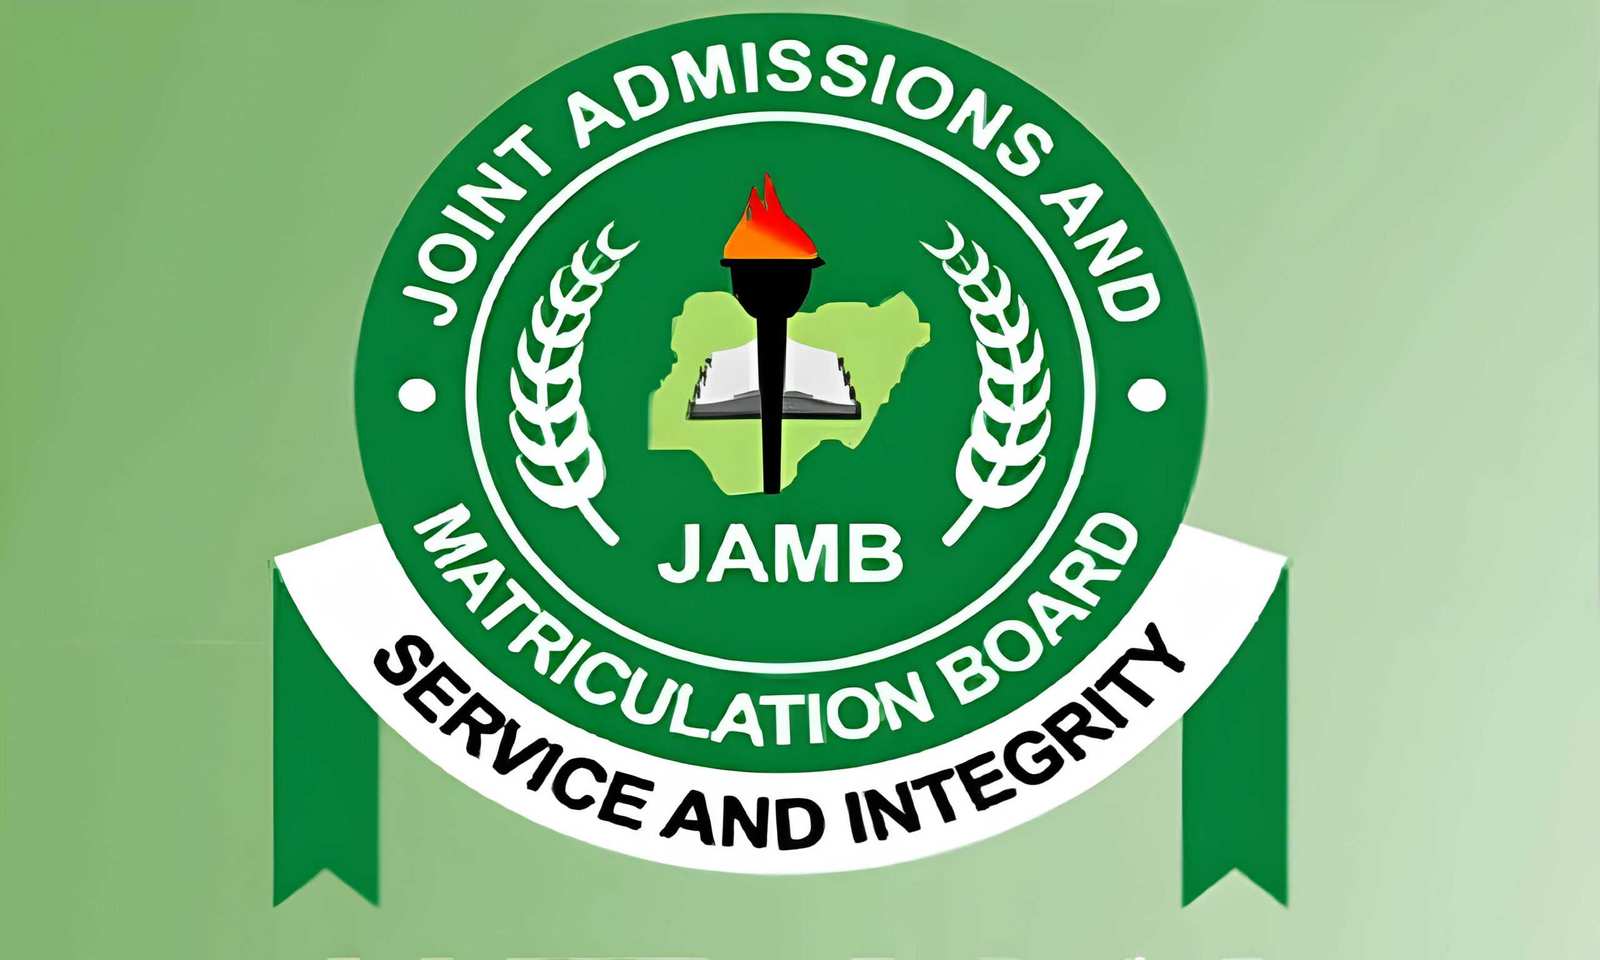 Joint Admissions and Matriculation Board